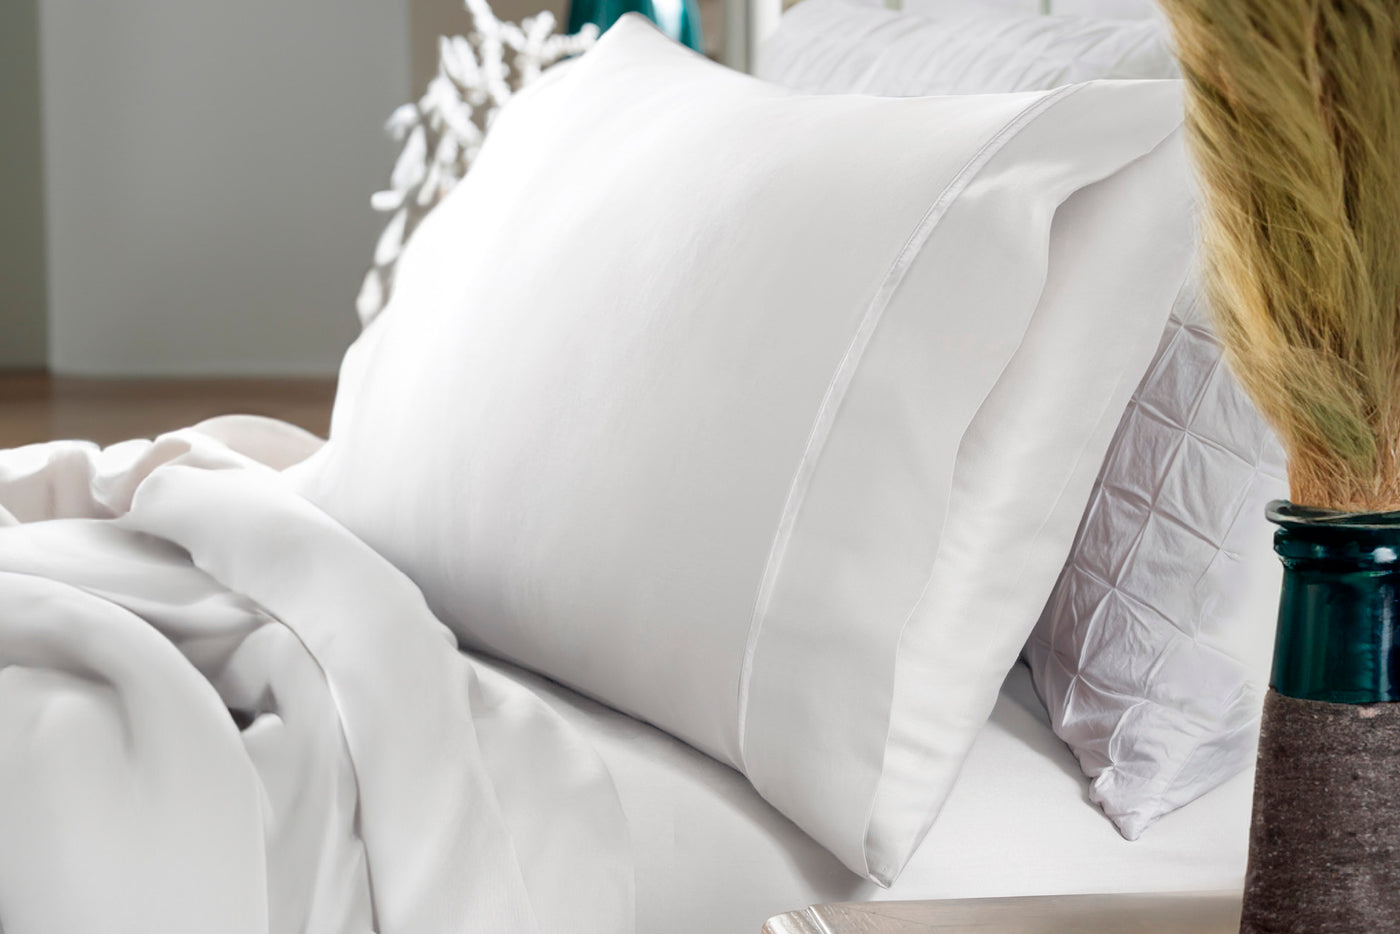 Image of a white pillowcase with pillow on a white bed with various decor in the room